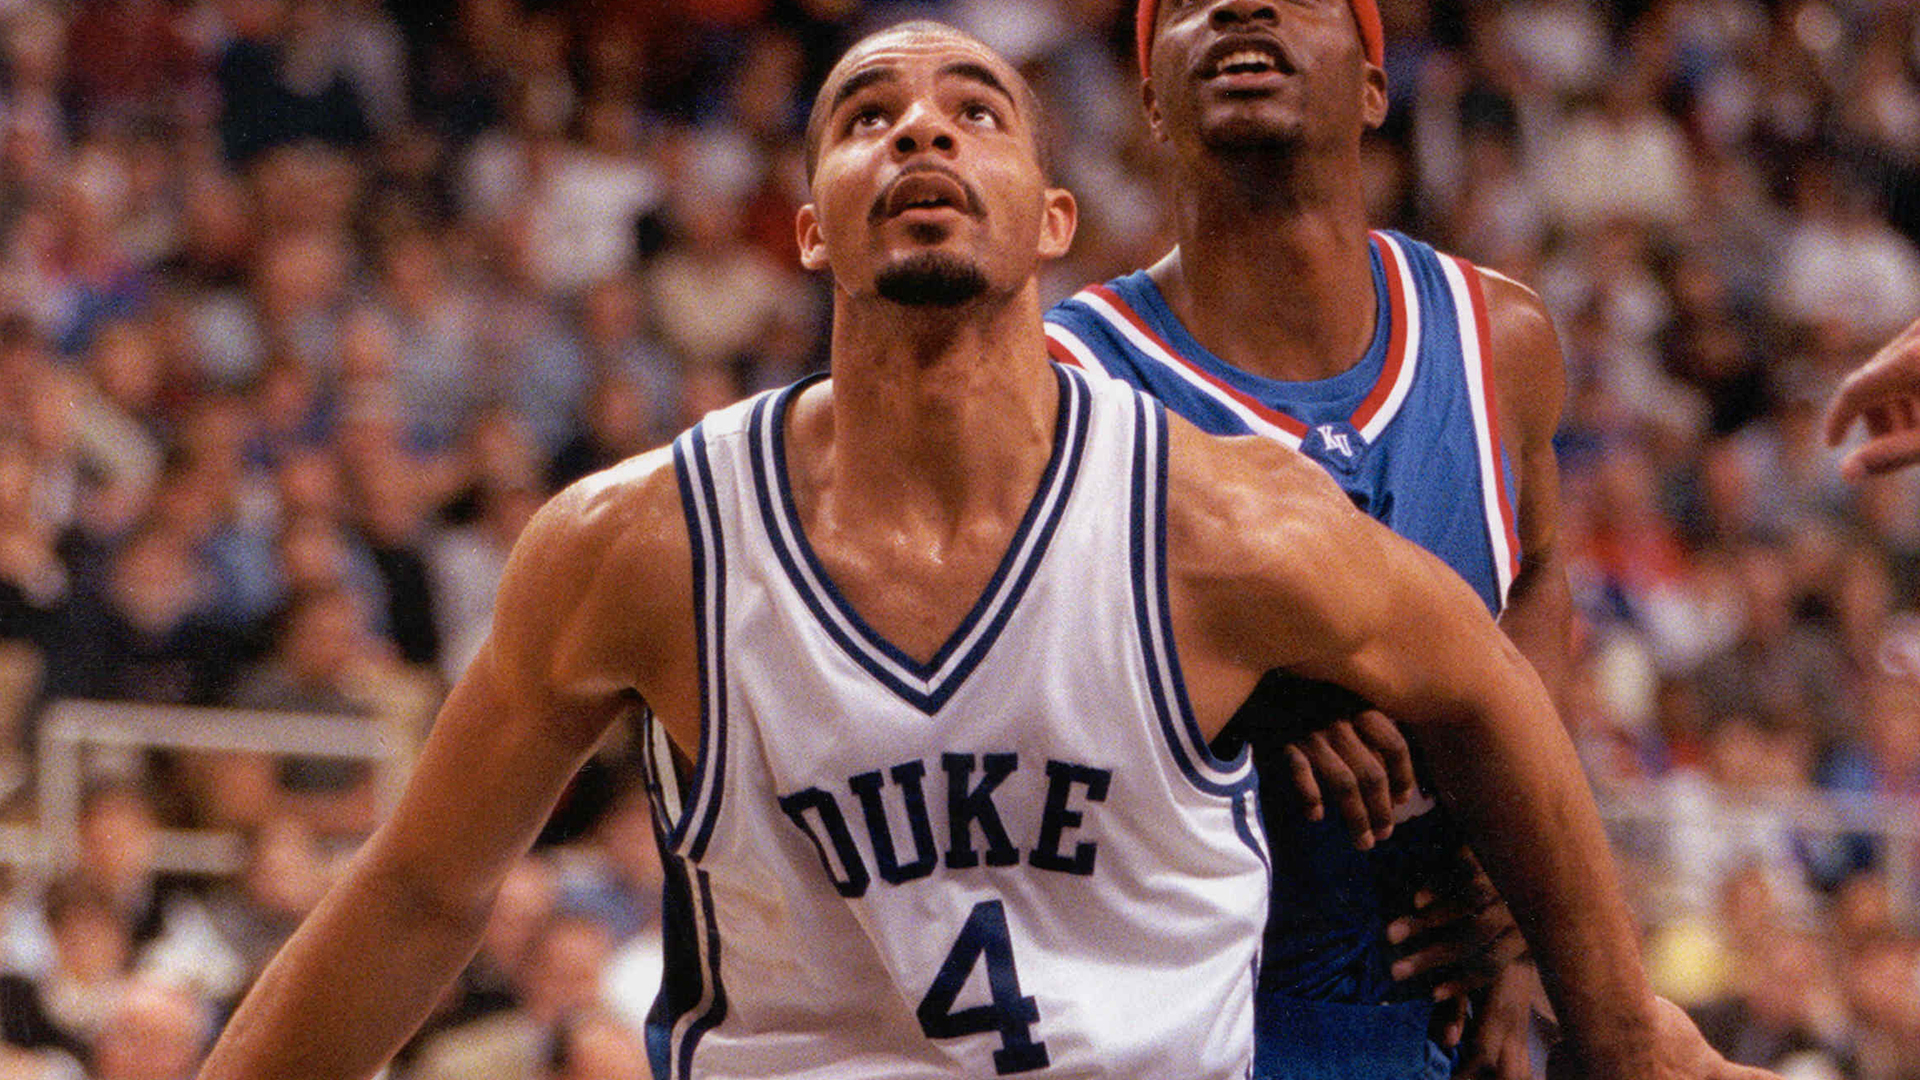 Awesome News from Cbooz: @MisterCBooz Completes Quest for Duke Degree